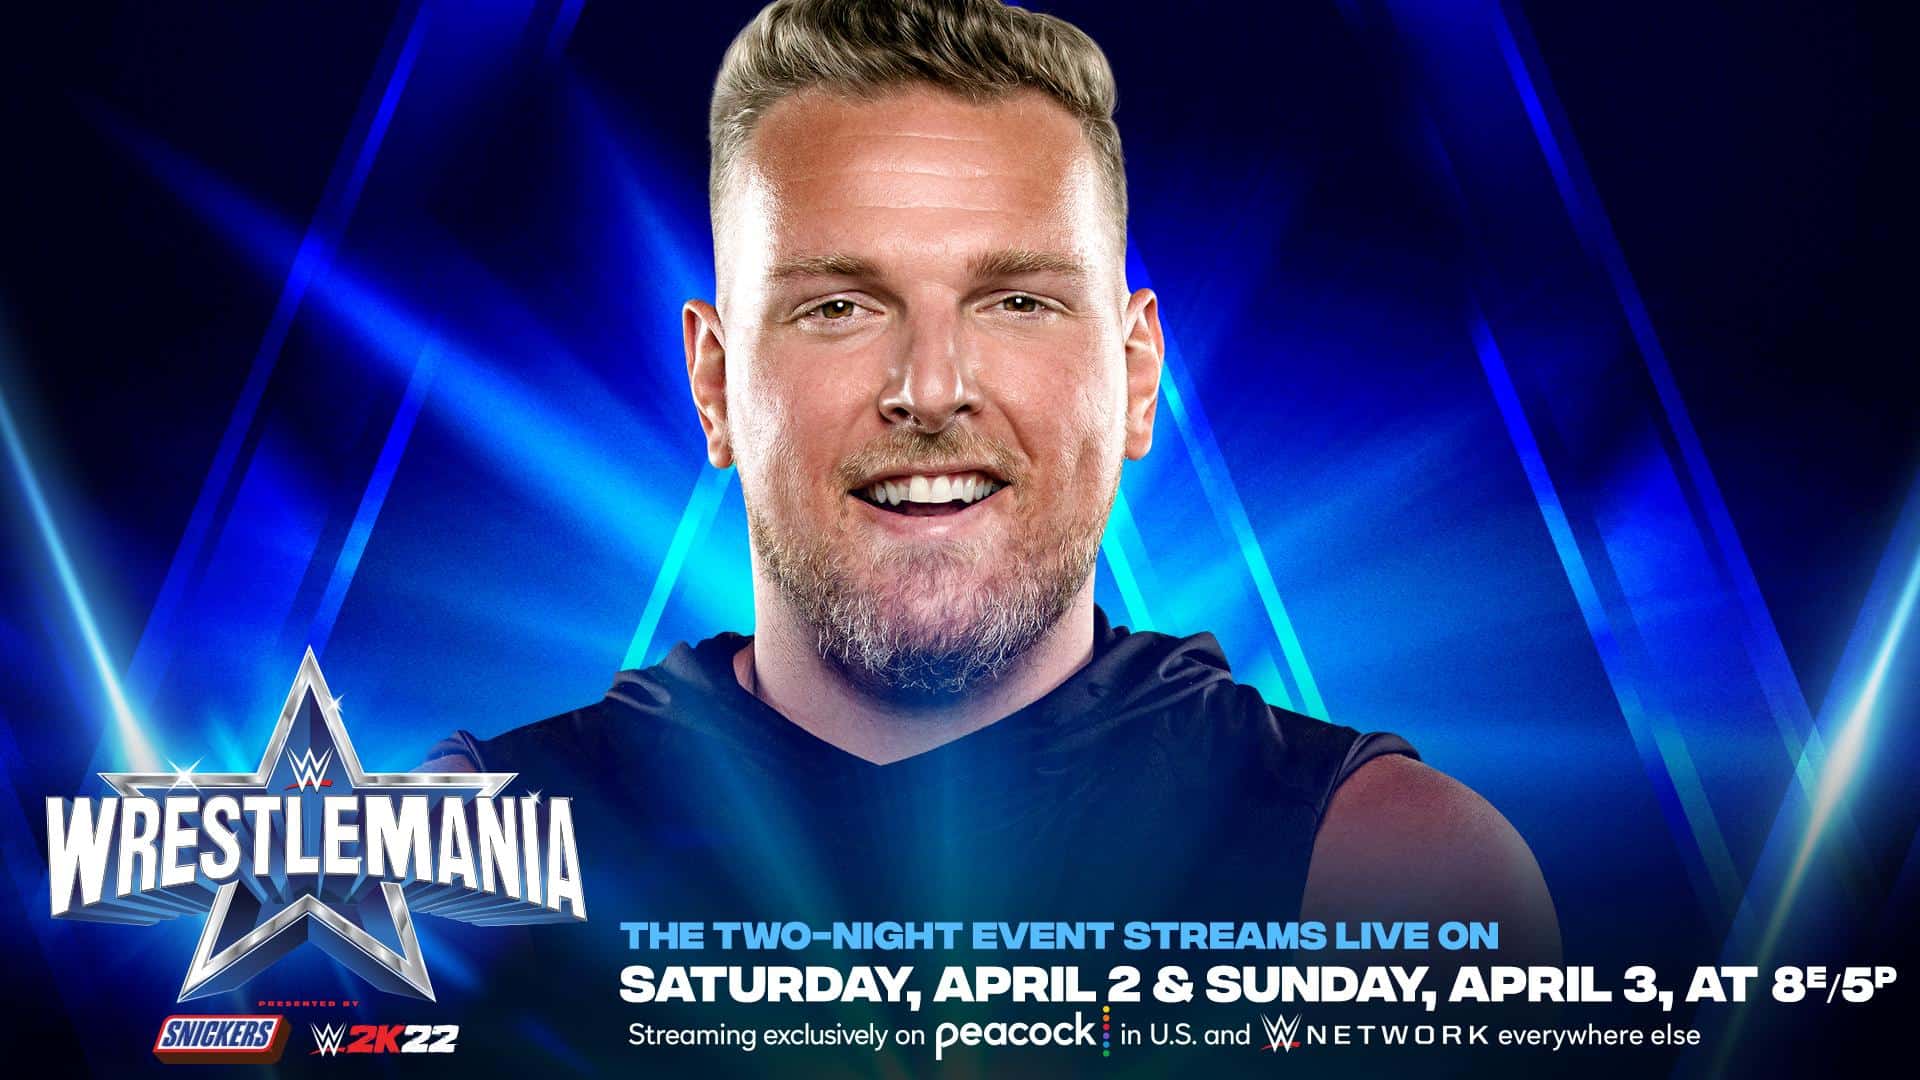 Pat McAfee will compete at WrestleMania